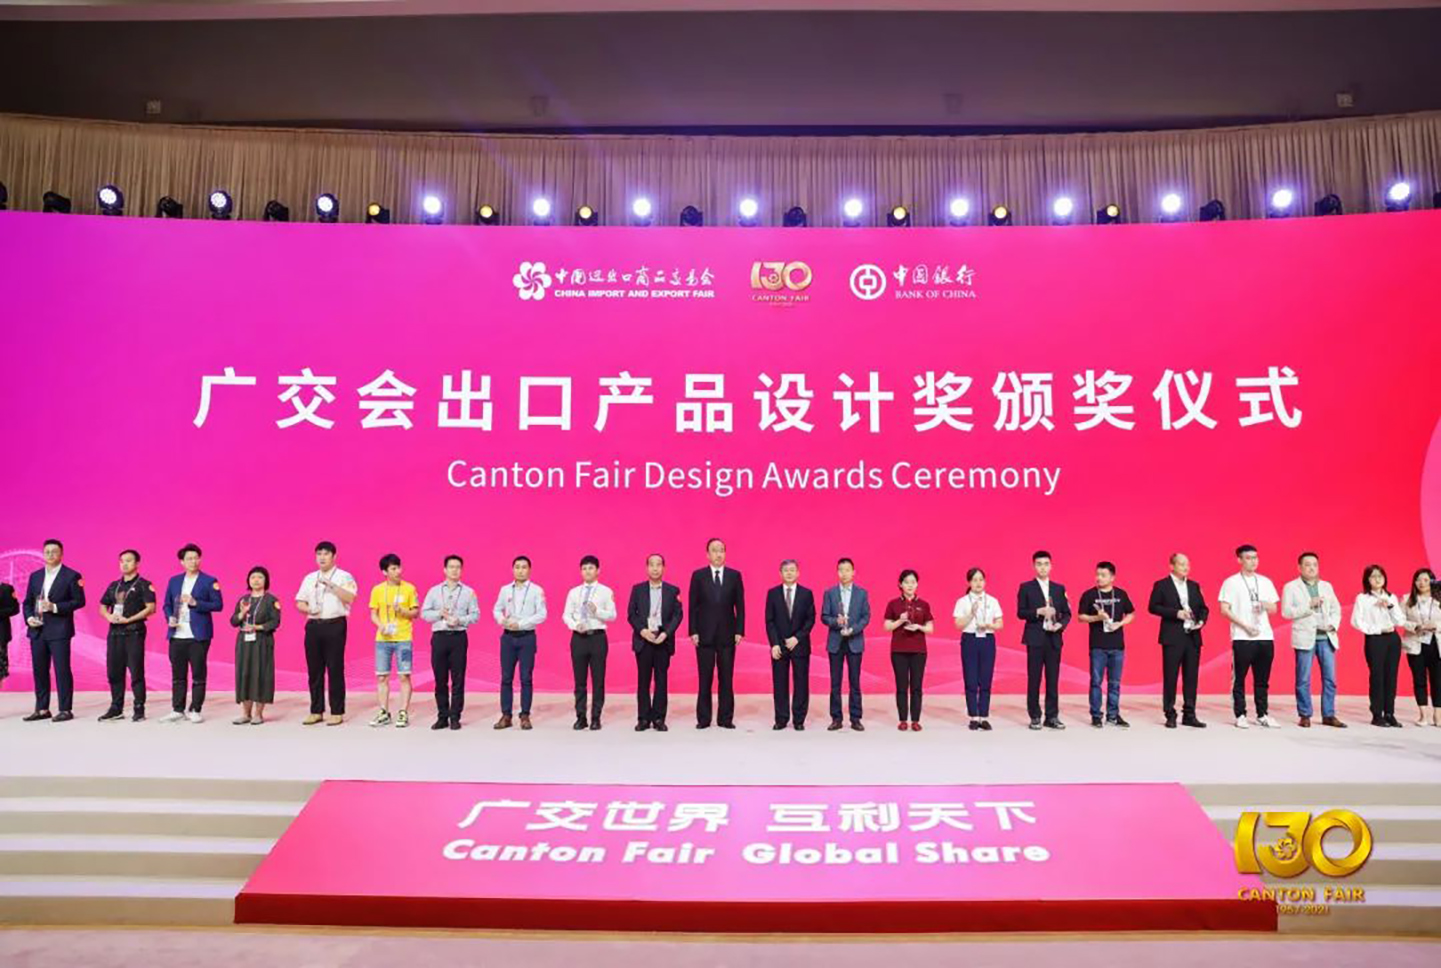 HAERS, has won two Canton Fair Export Product Awards in 2021.